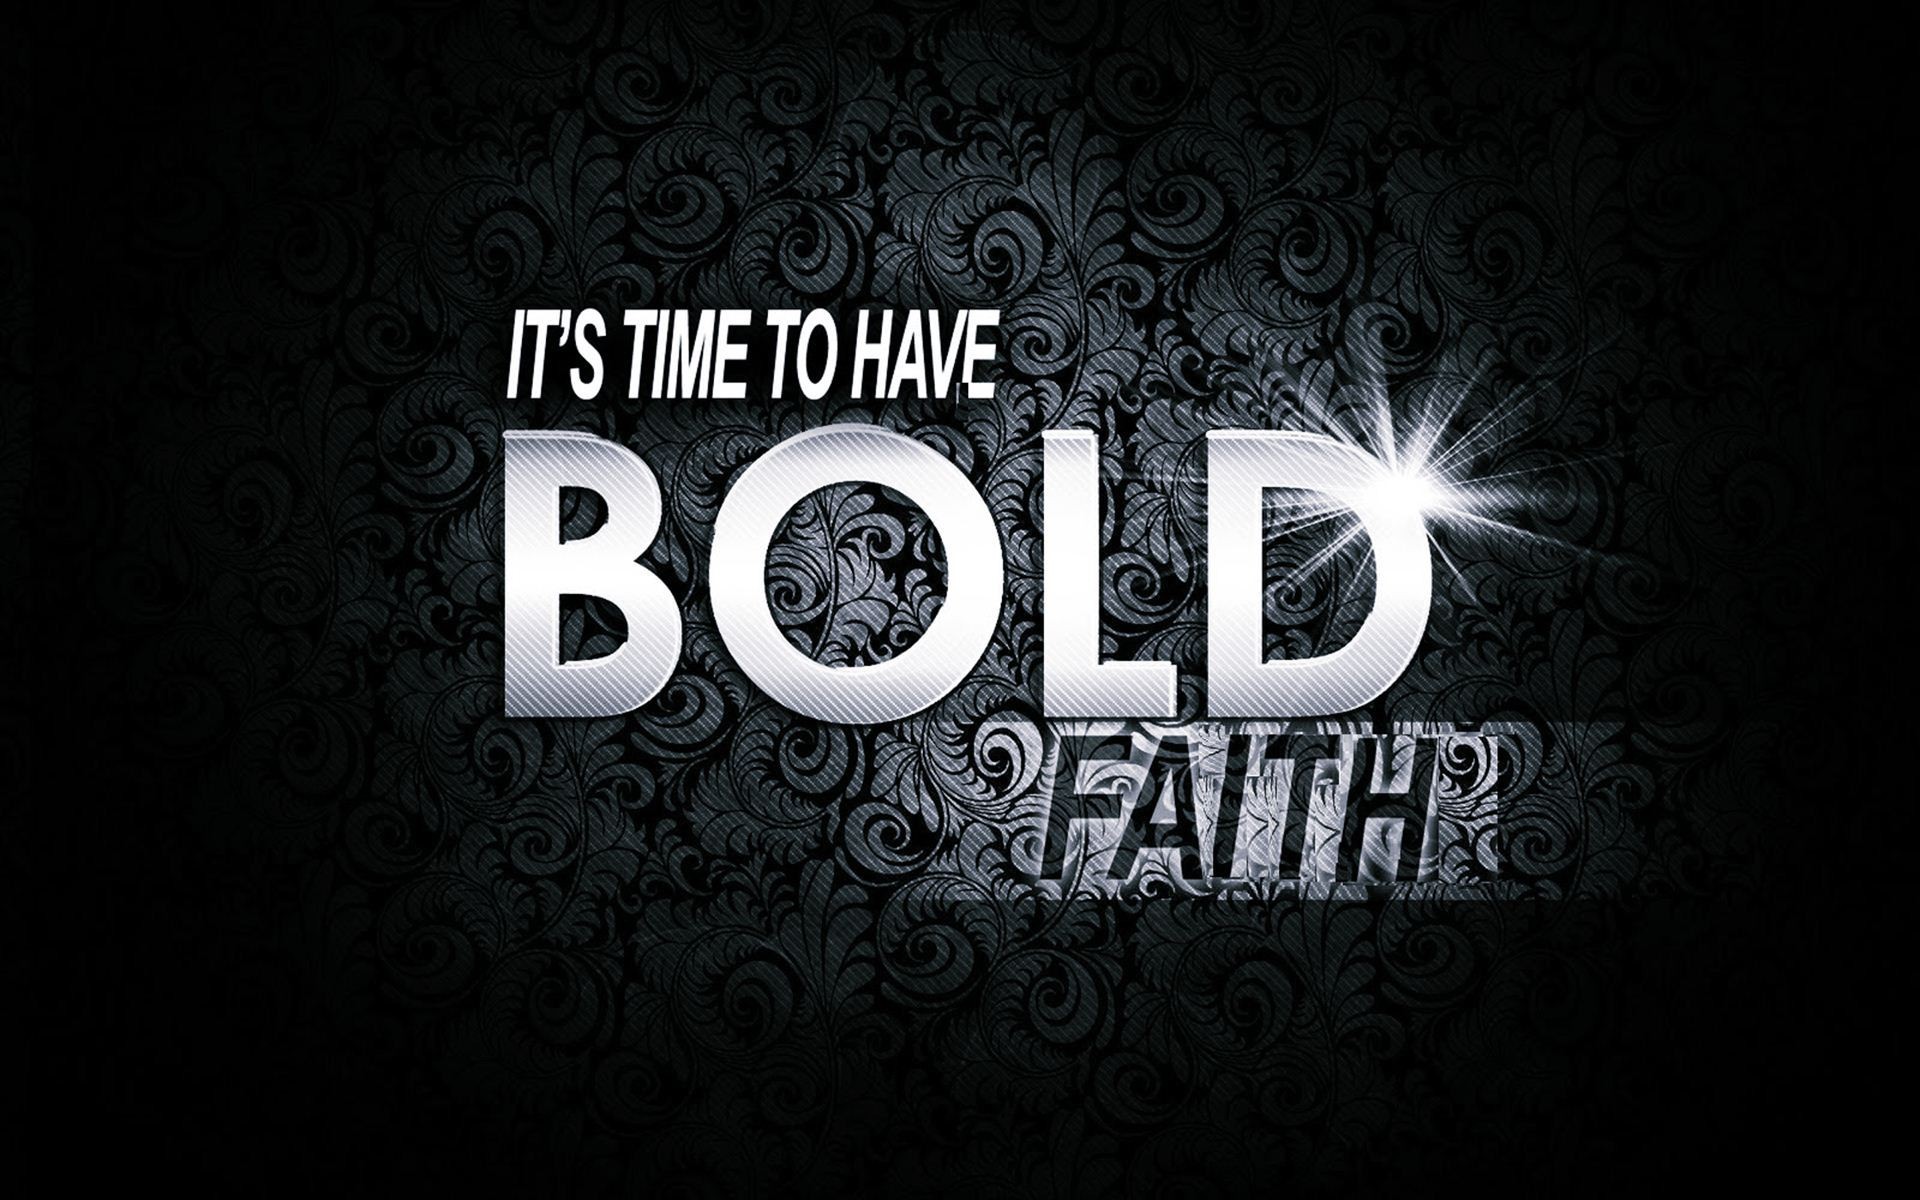 Awesome Hd Wallpapers Quotes Best Of Christian Wallpapers - Graphic Design - HD Wallpaper 